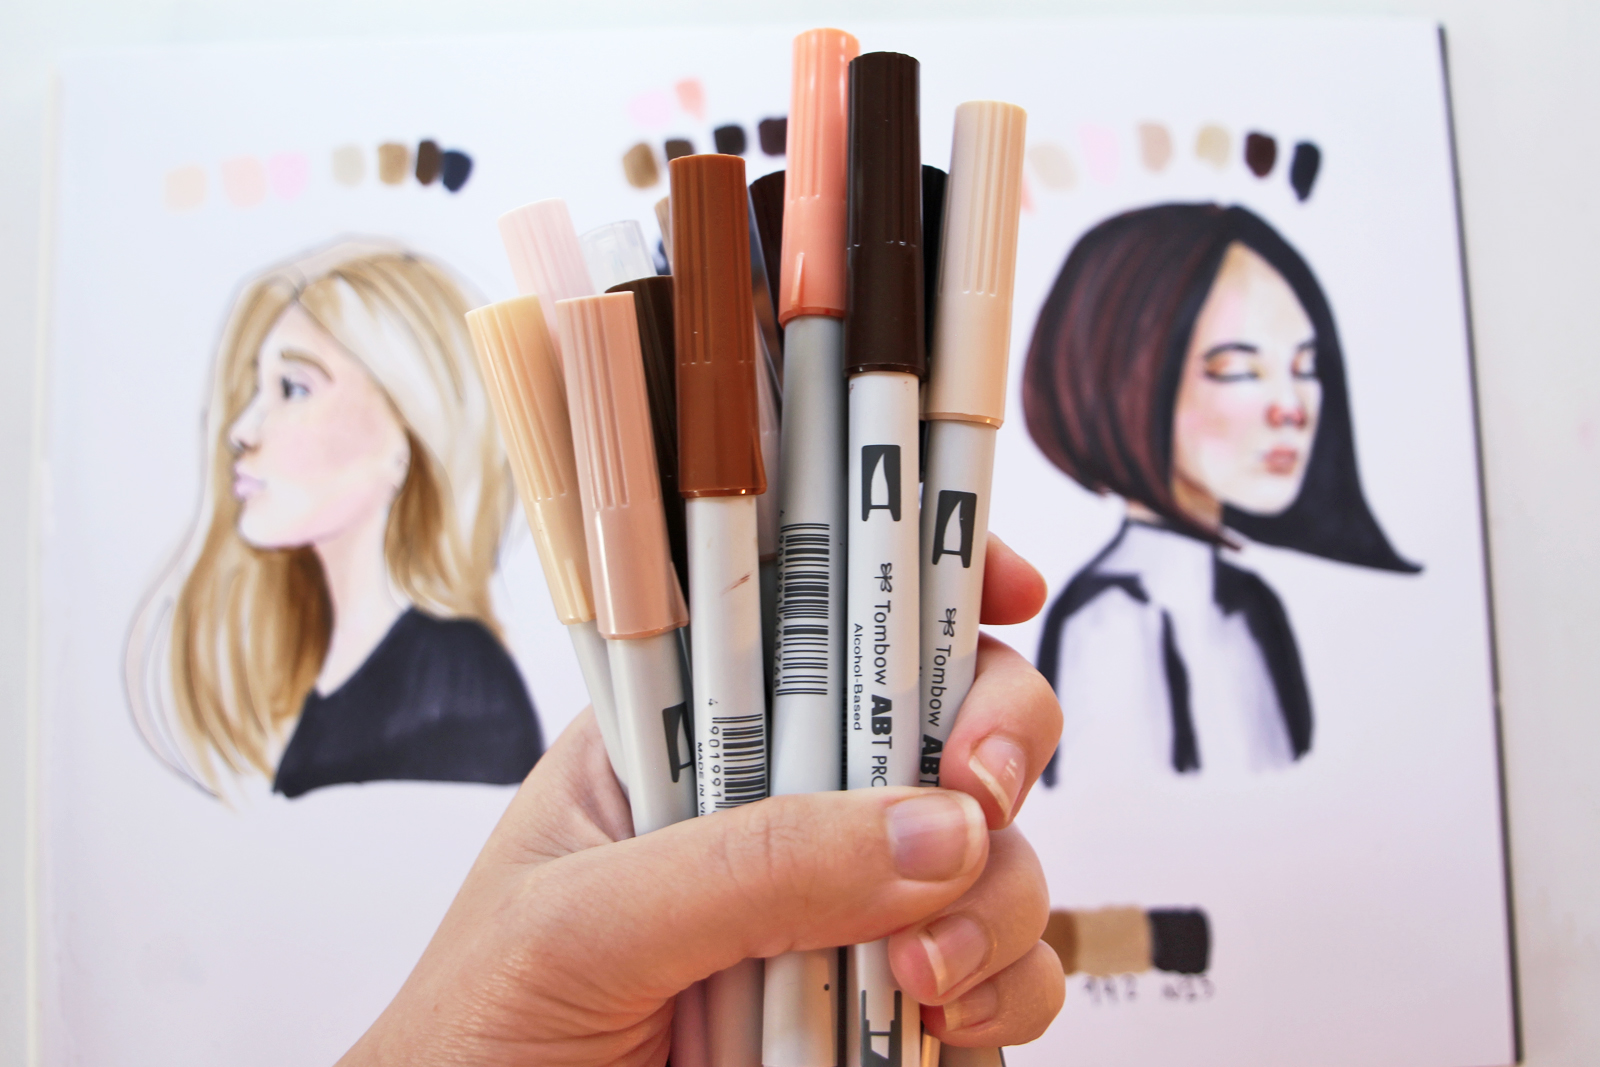 http://blog.tombowusa.com/wp-content/uploads/files/Katie_Coloring-Skintones-with-Tombow-ABT-PRO-Markers-2.jpg